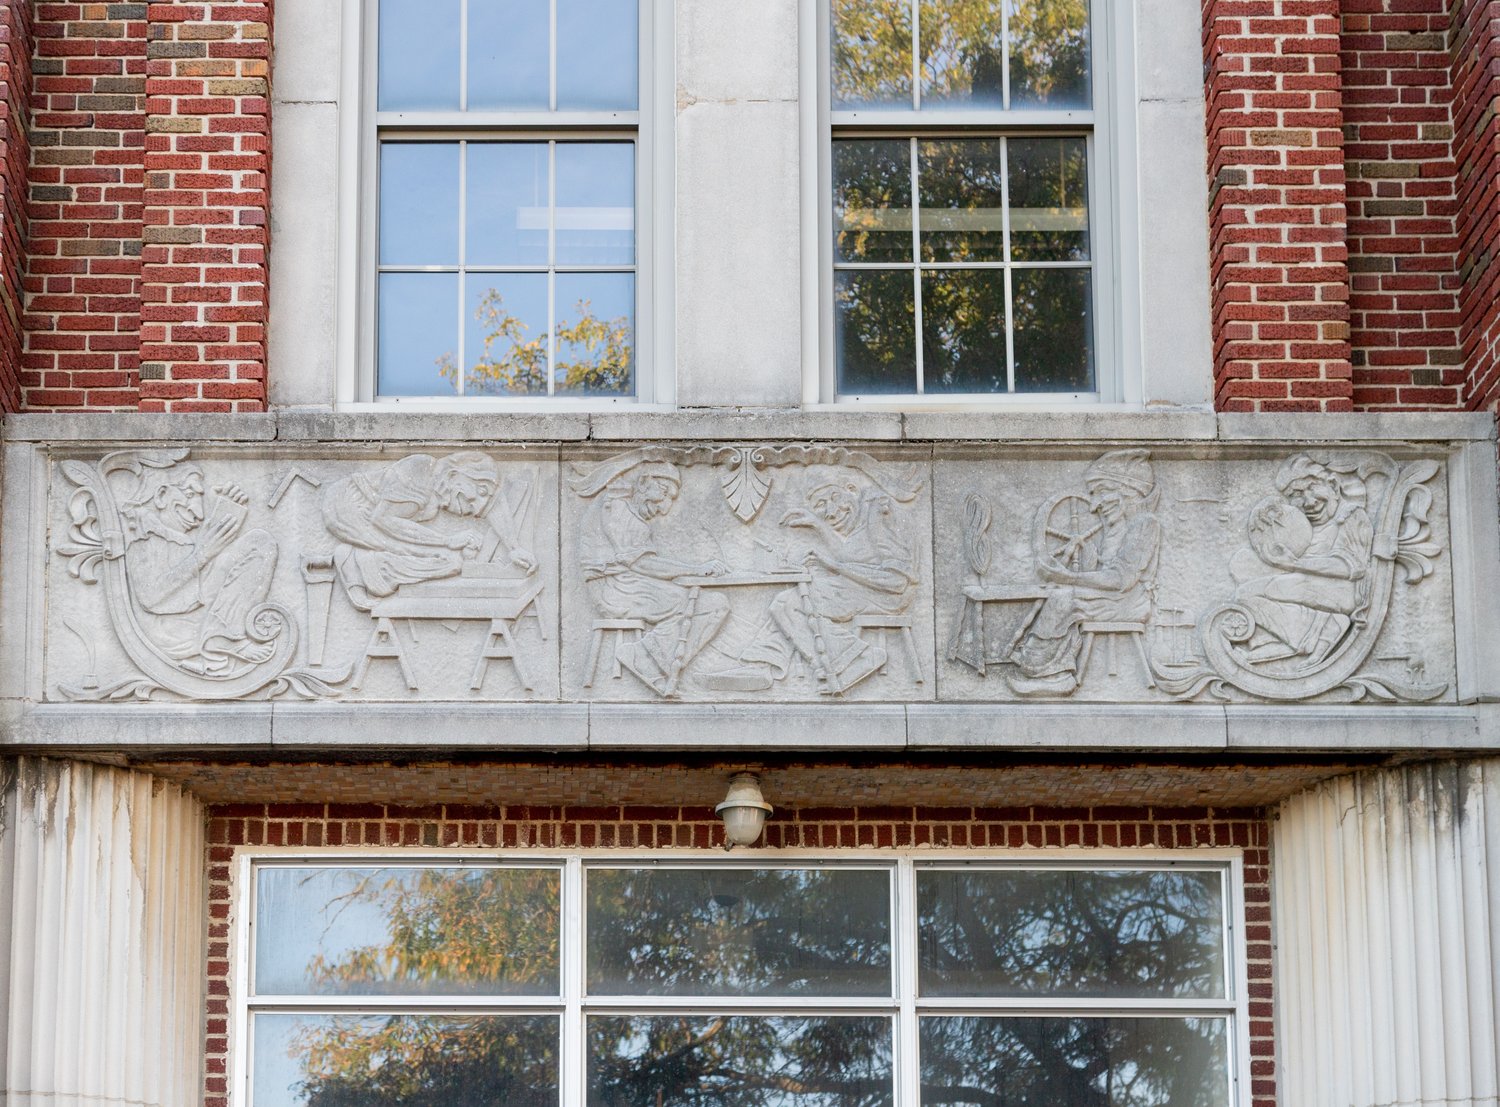 Detail from the former Central High School in Moberly.